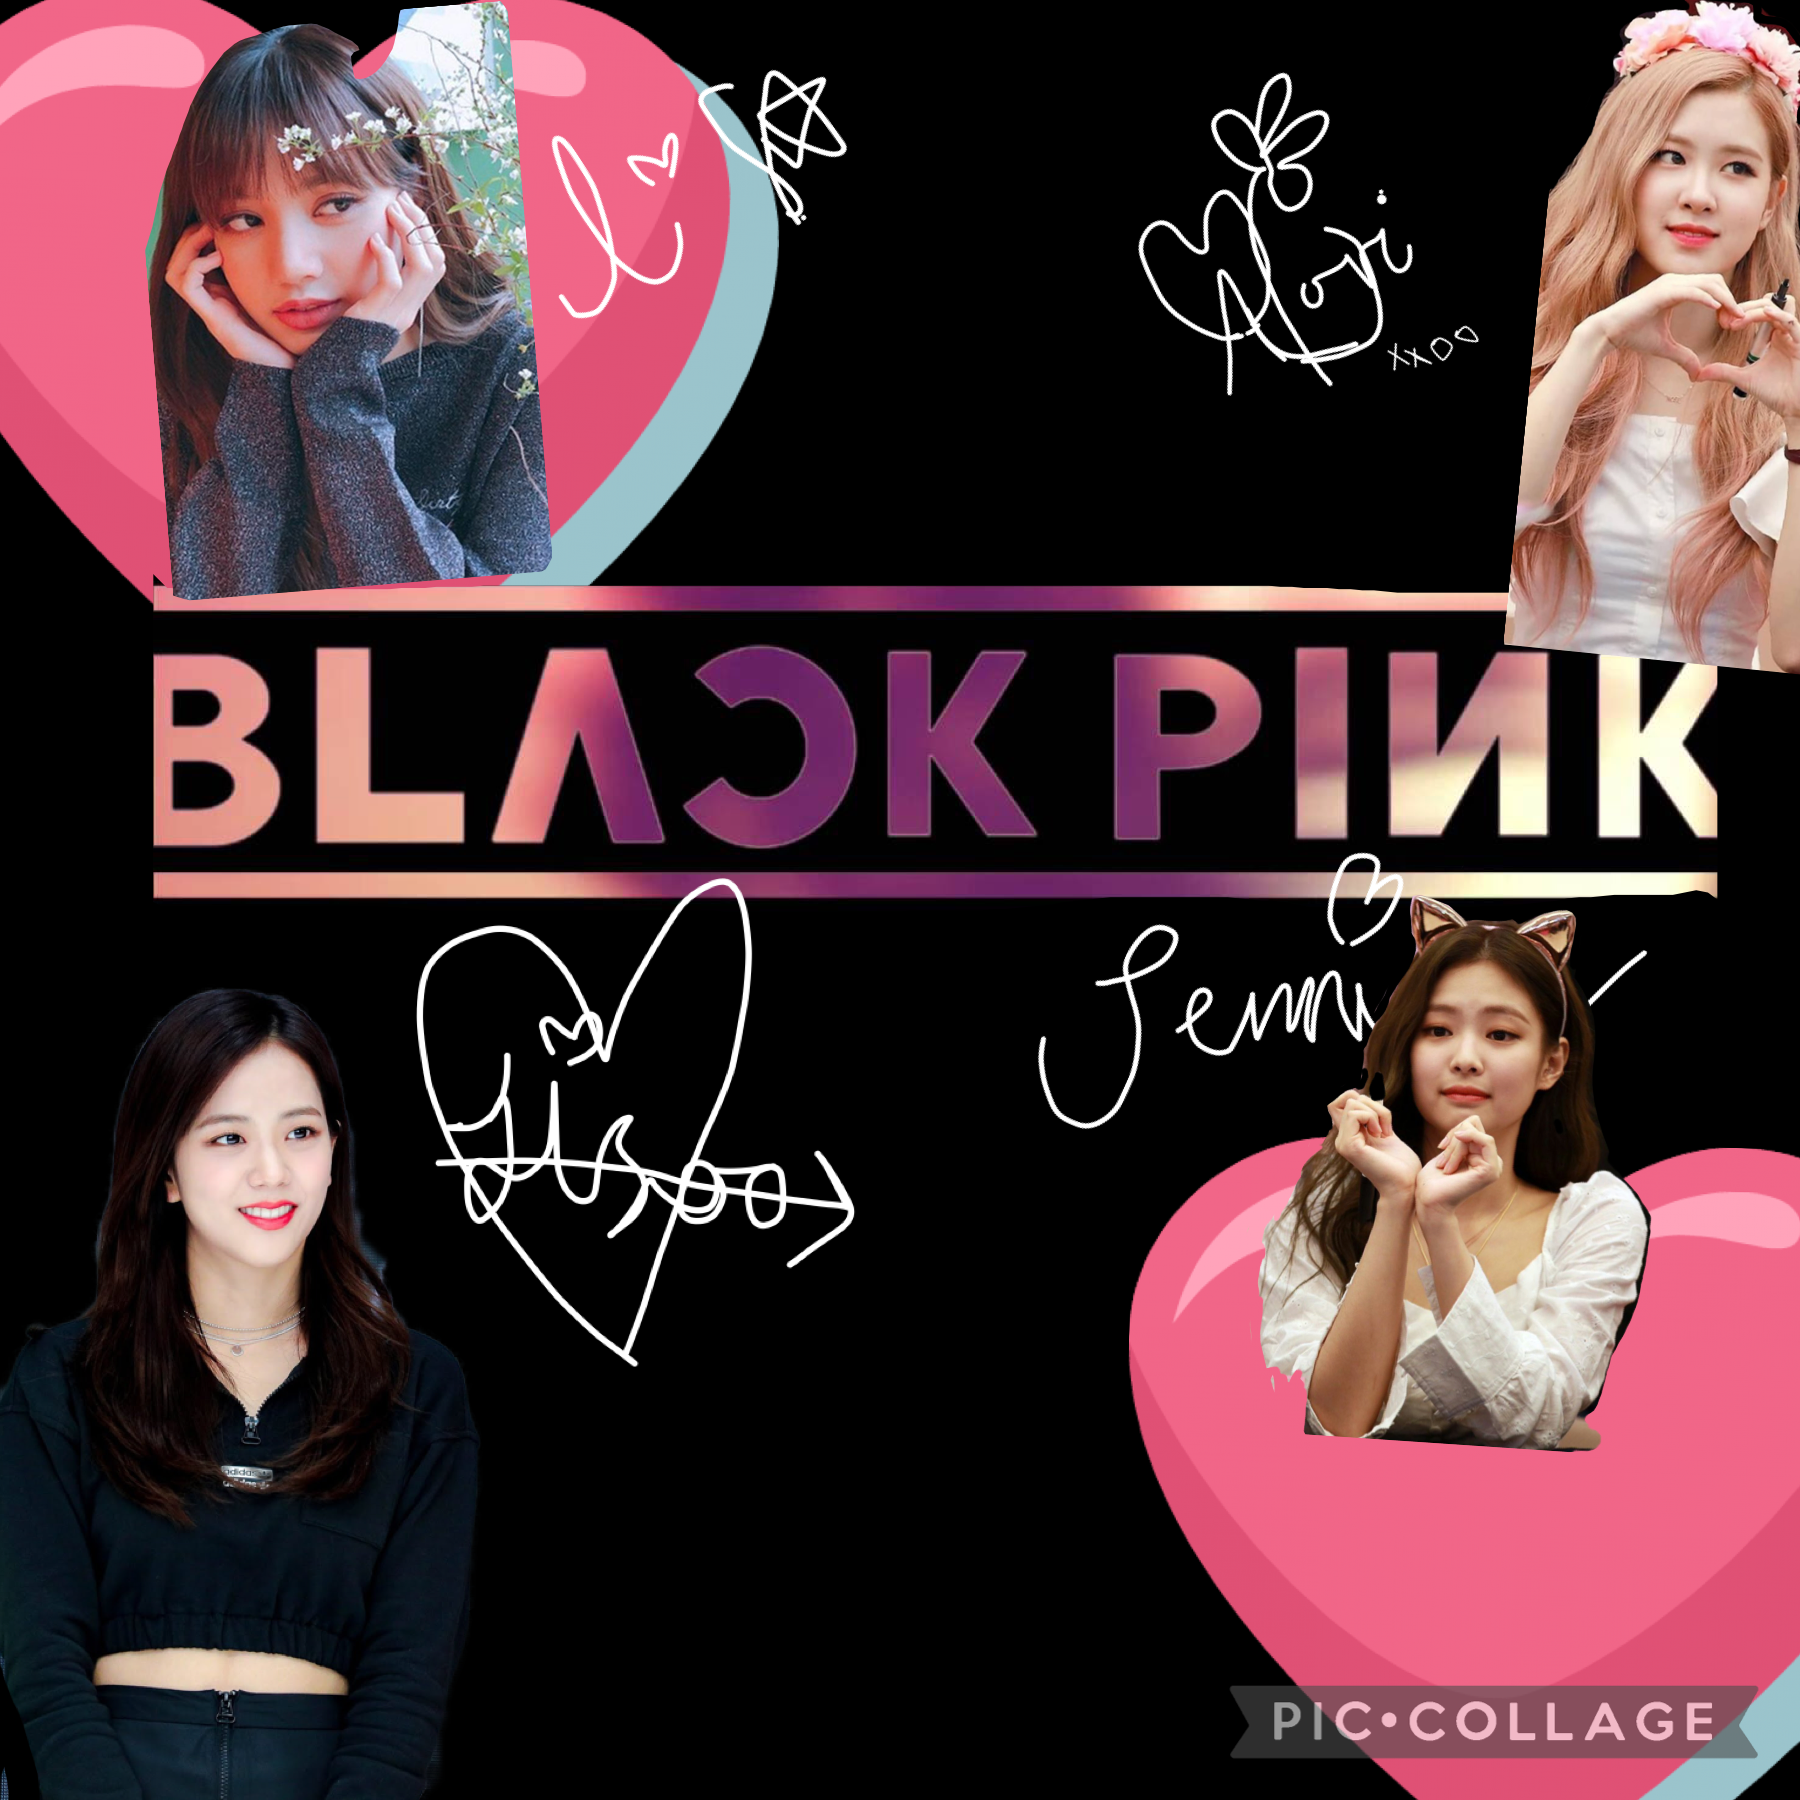 Blackpink in your area
